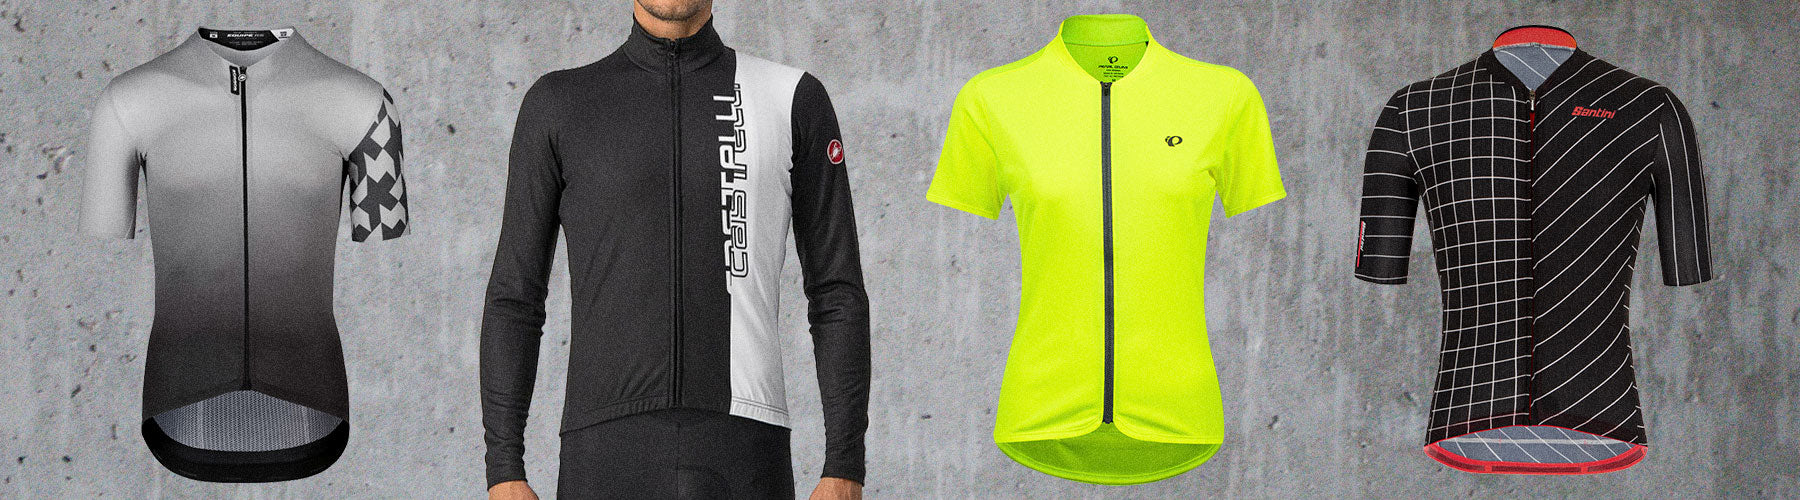 Siroko gravel cycling apparel: Design, comfort and resistance on